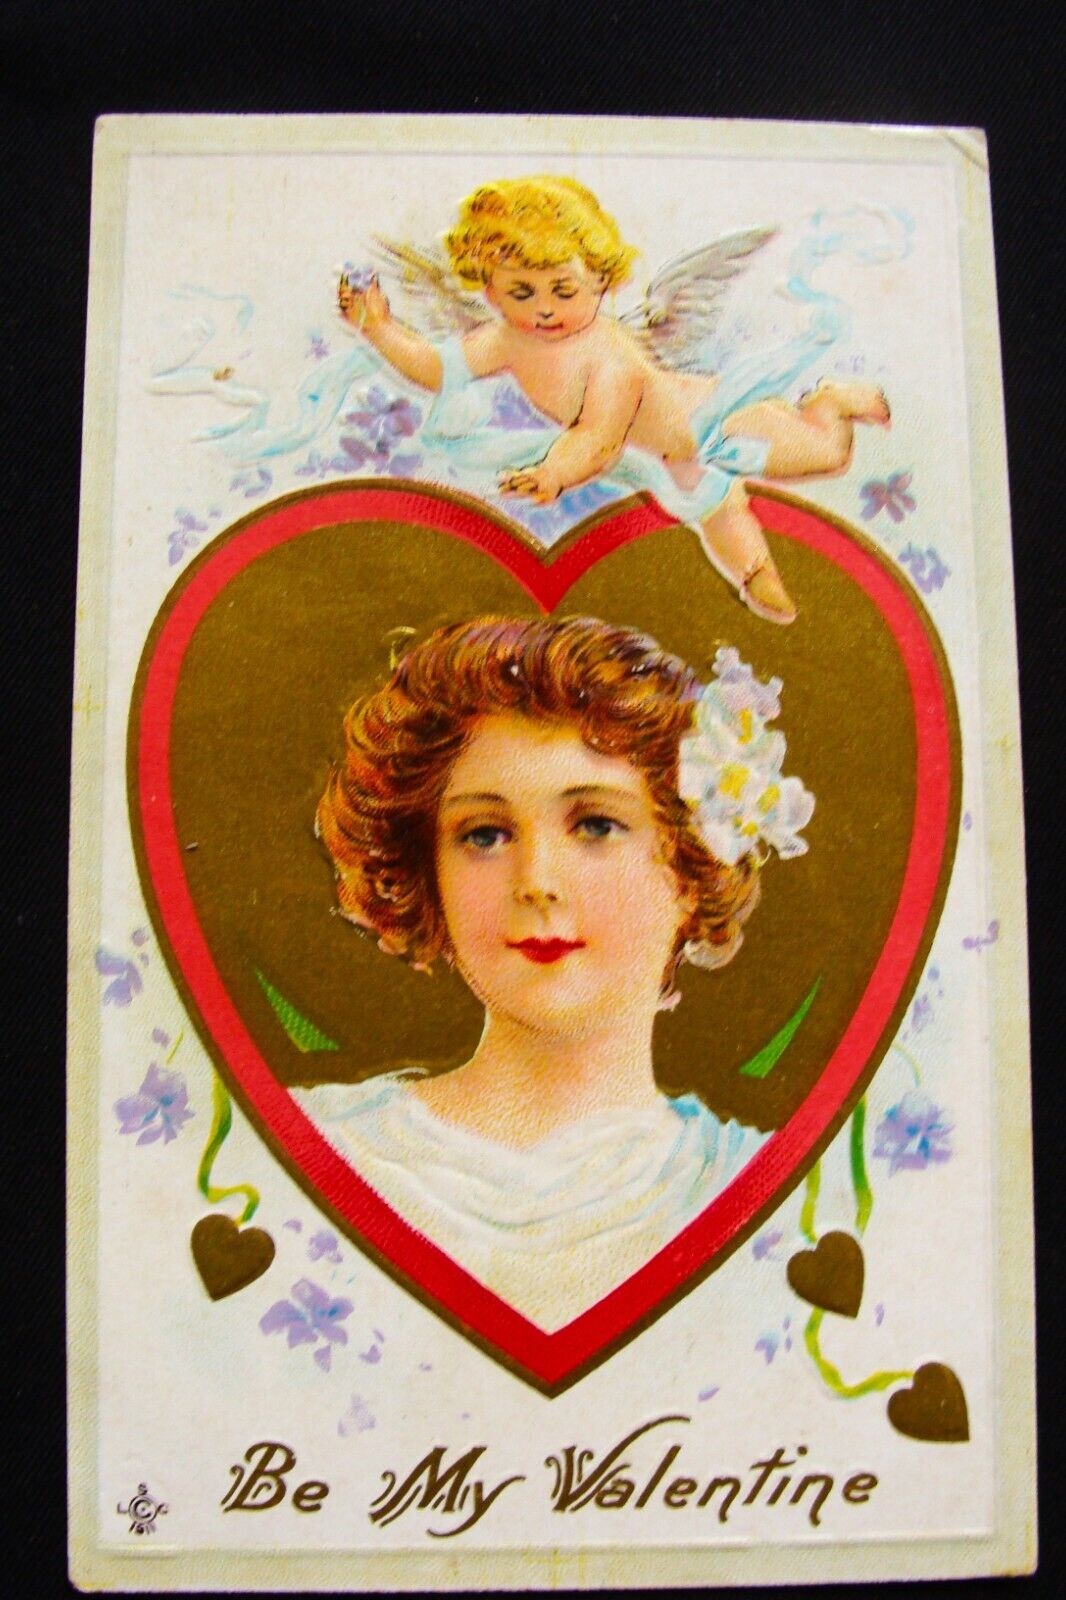 Cupid Wrapped In Blue Ribbon Over Blonde Girl in Heart Cameo Valentine Postcard